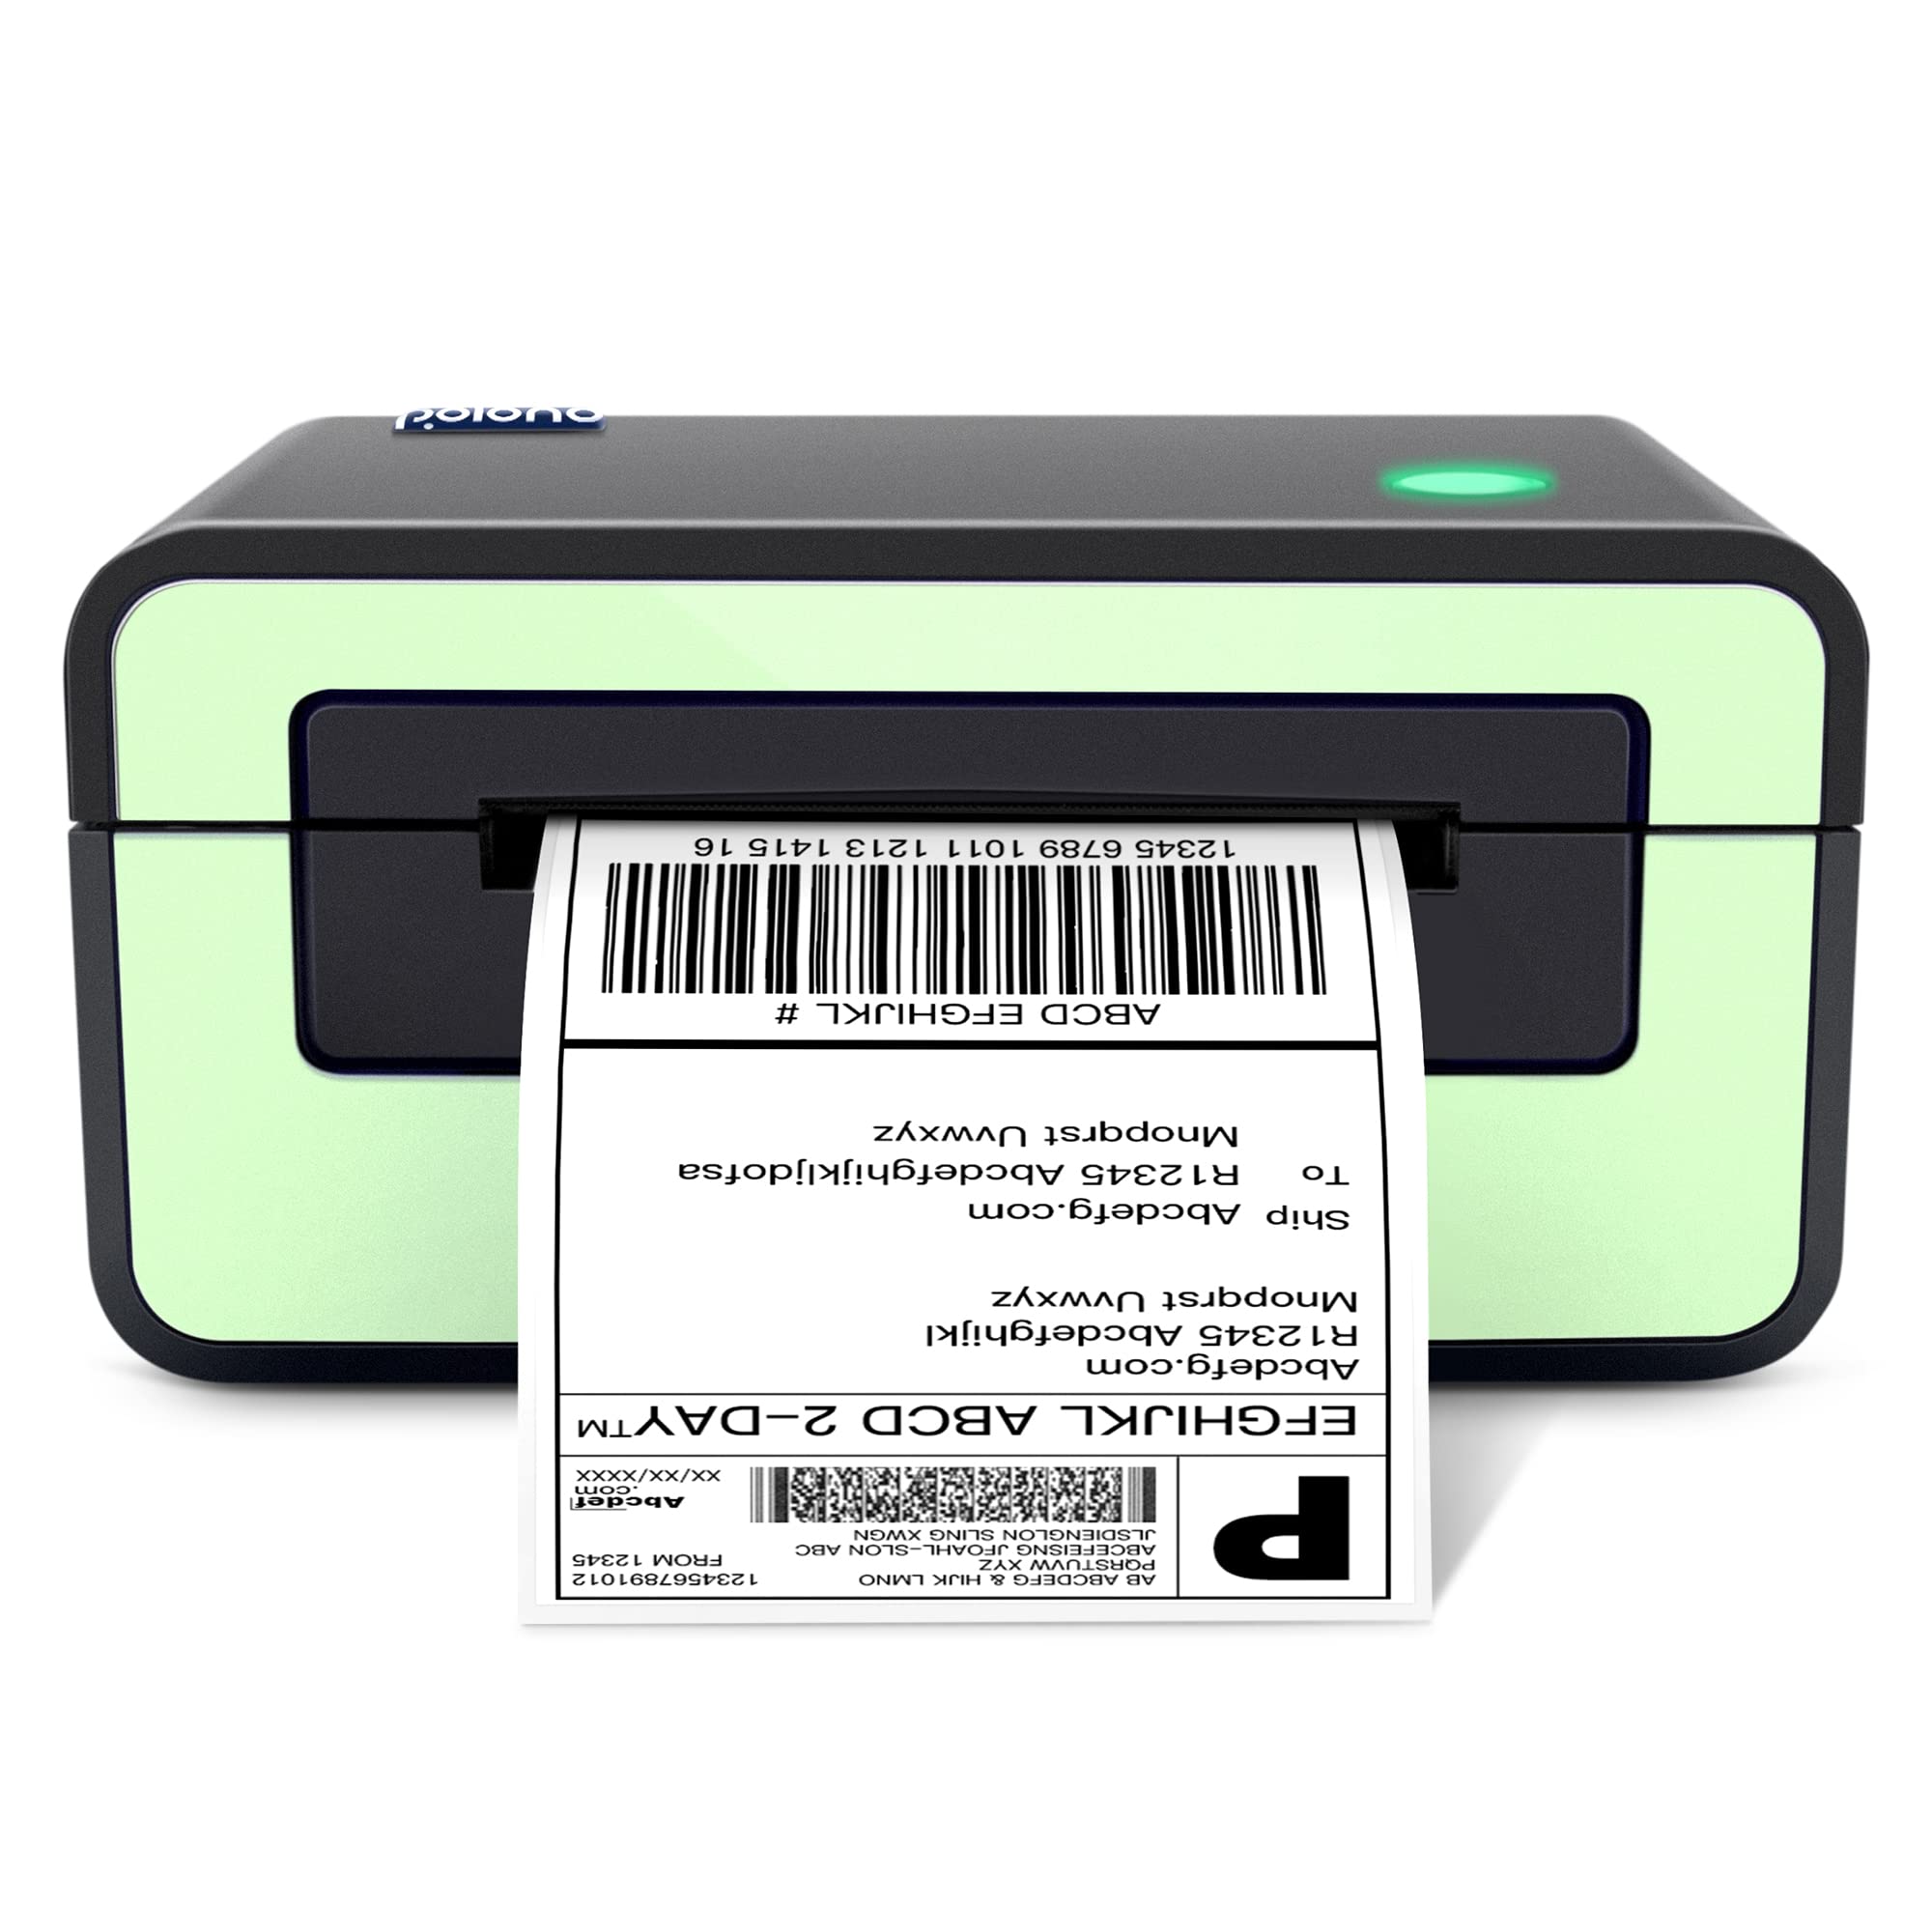 POLONO Label Printer - 150mms 4x6 Thermal Label Printer, commercial Direct Thermal Label Maker, compatible with , Ebay, Etsy, Sh